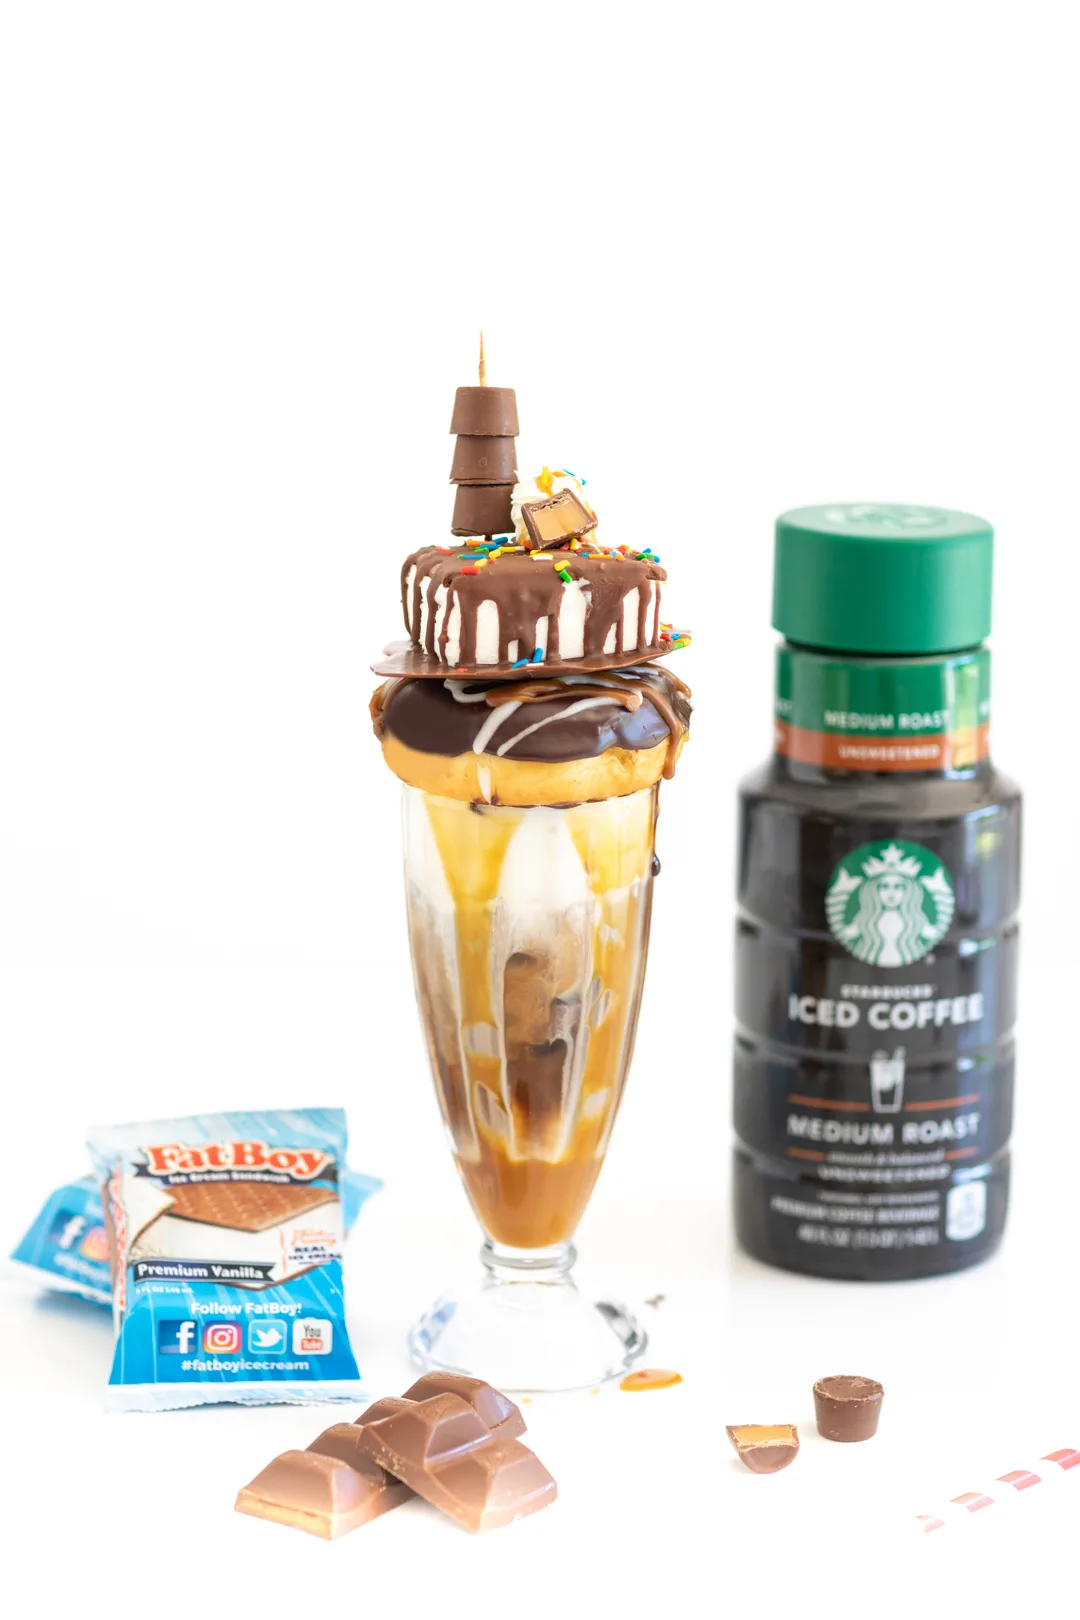 freakshake style iced coffee made with store-bought starbucks iced coffee